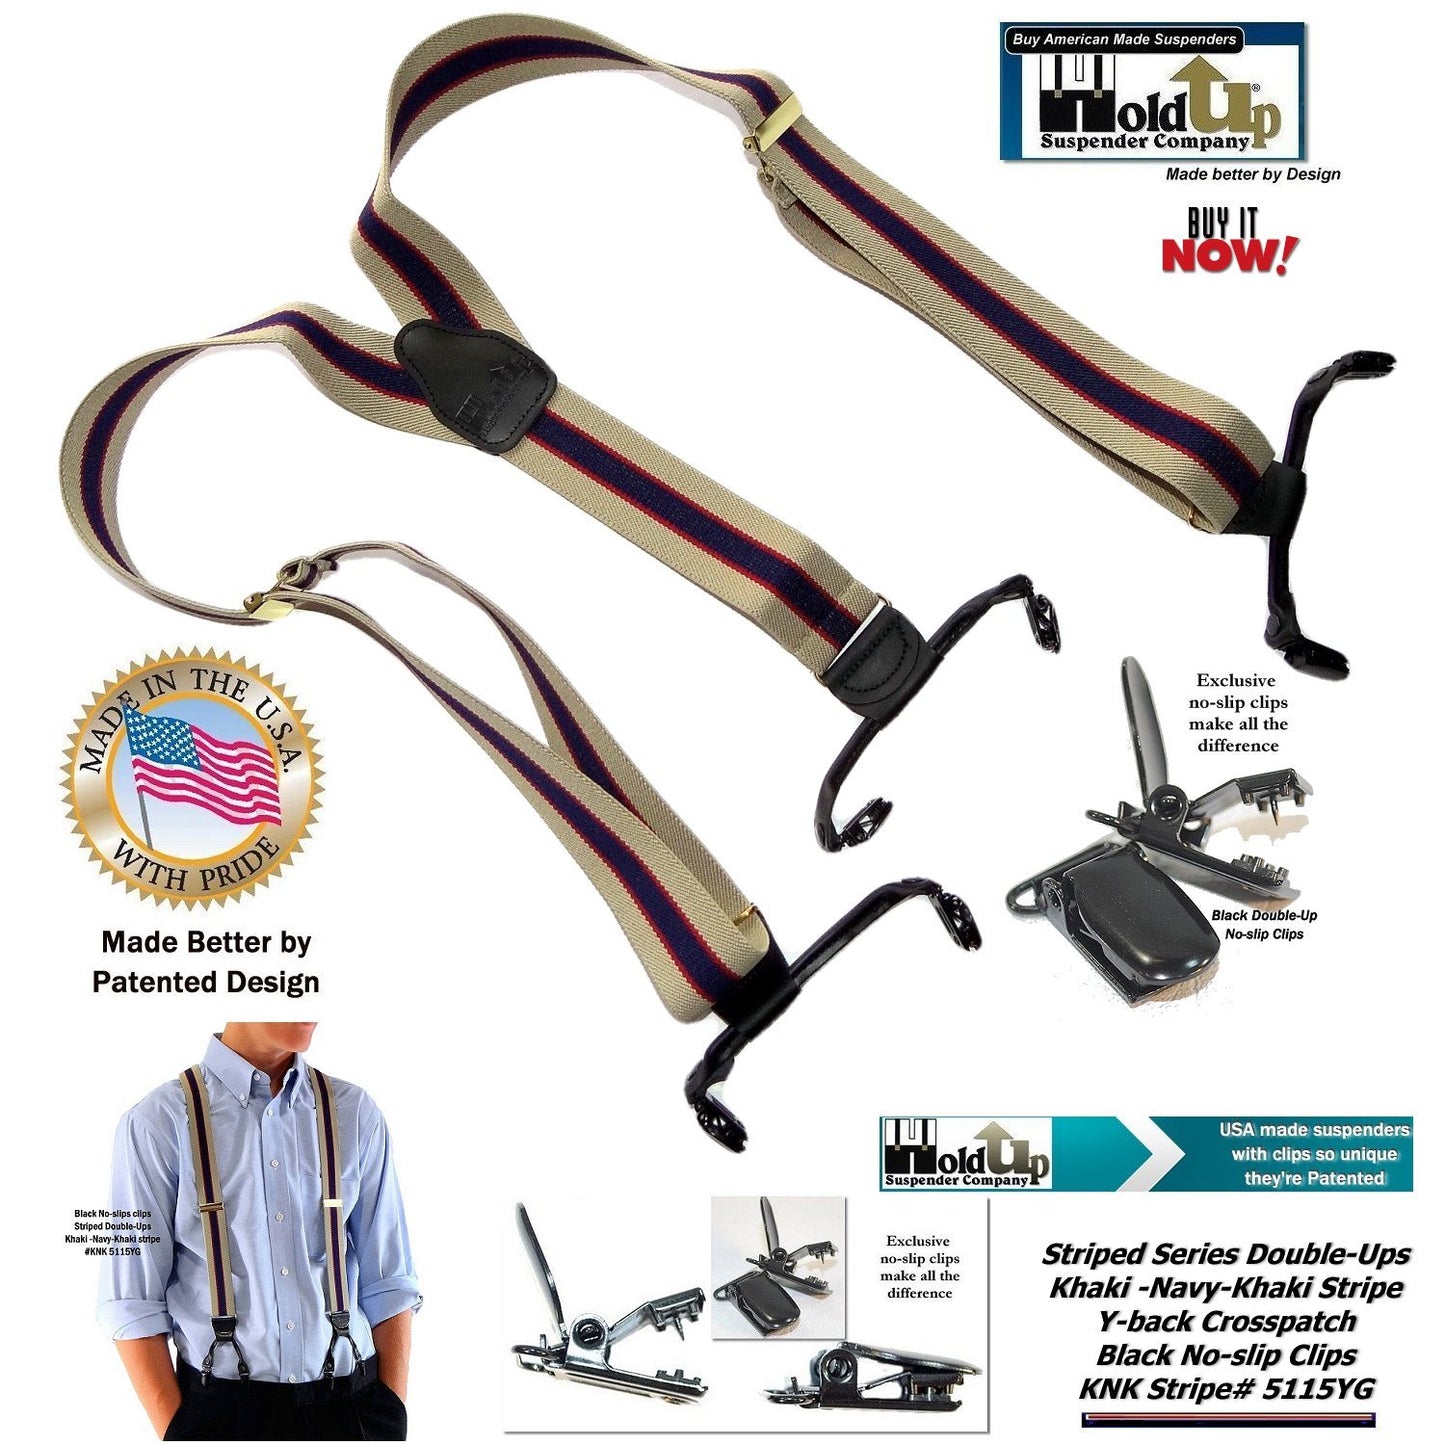 Hold-Up Brand Khaki Tan and Navy stripe pattern suspenders with 1 1/2" wide straps in Double-Up Style and patented No-slip Clips